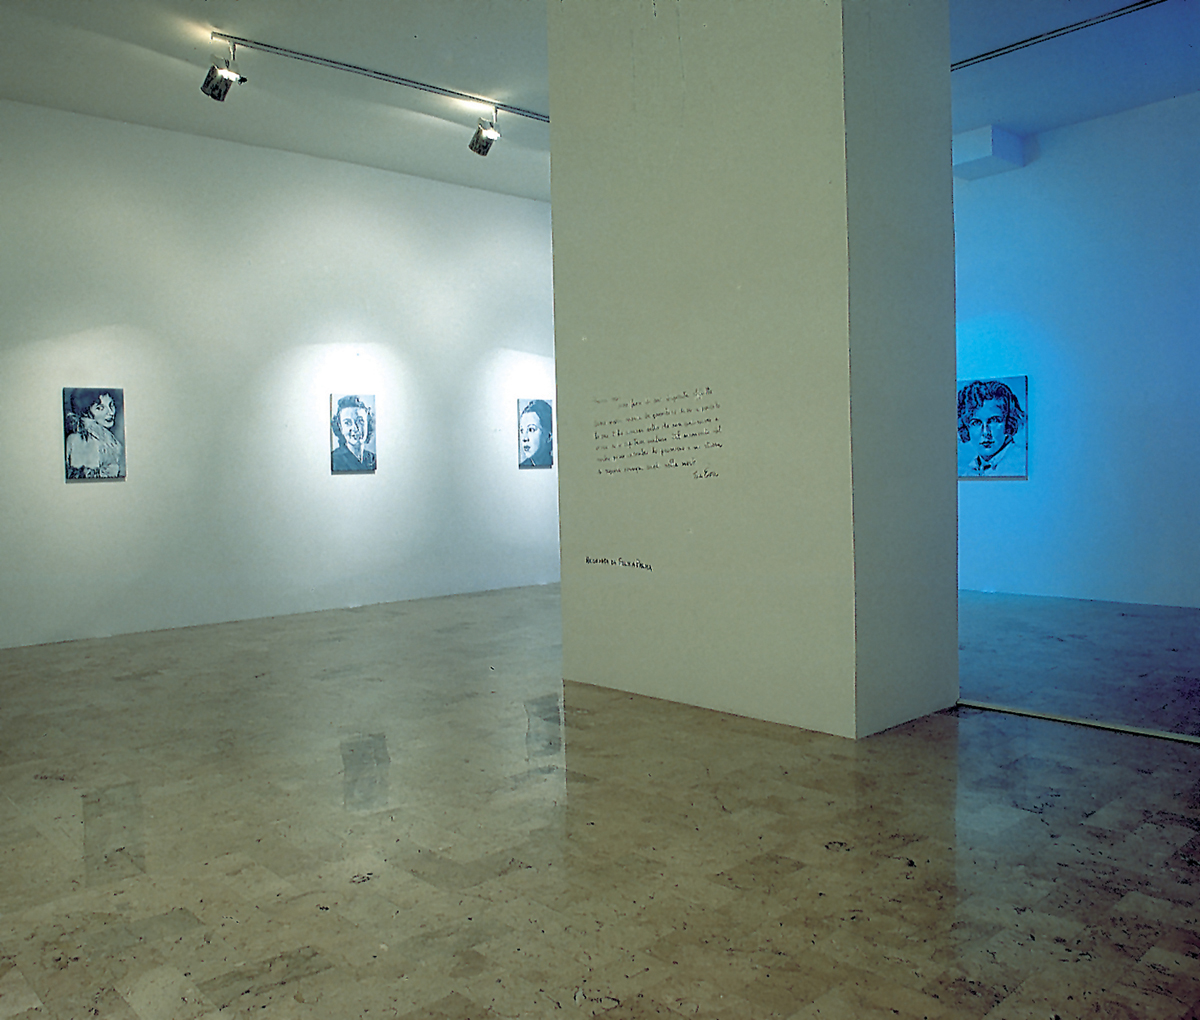 Femmes absolues, 2003, exhibition view